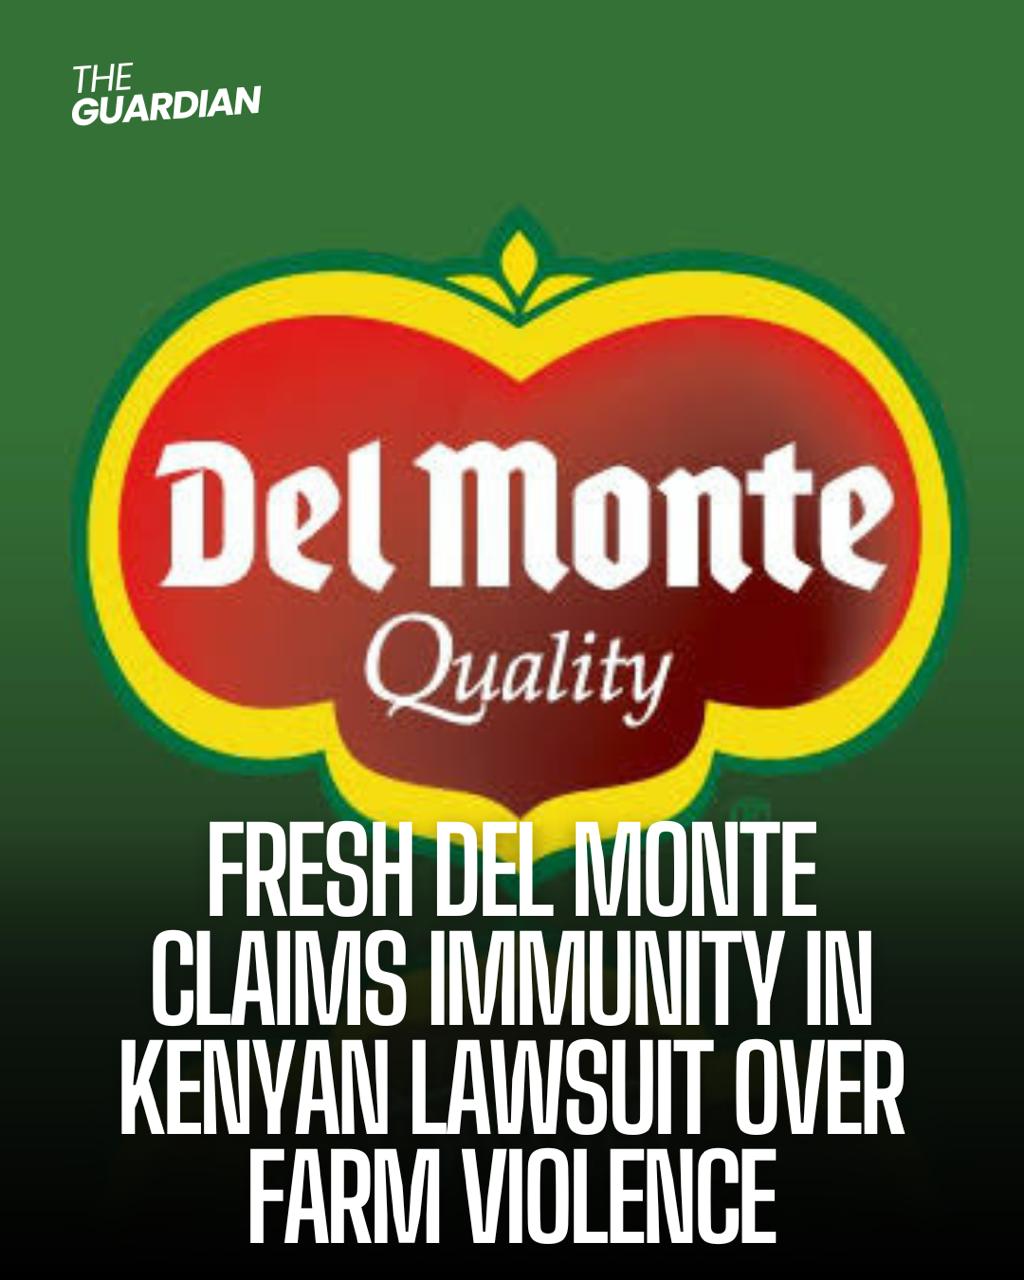 Fresh Del Monte claims immunity in Kenyan lawsuit over farm violence